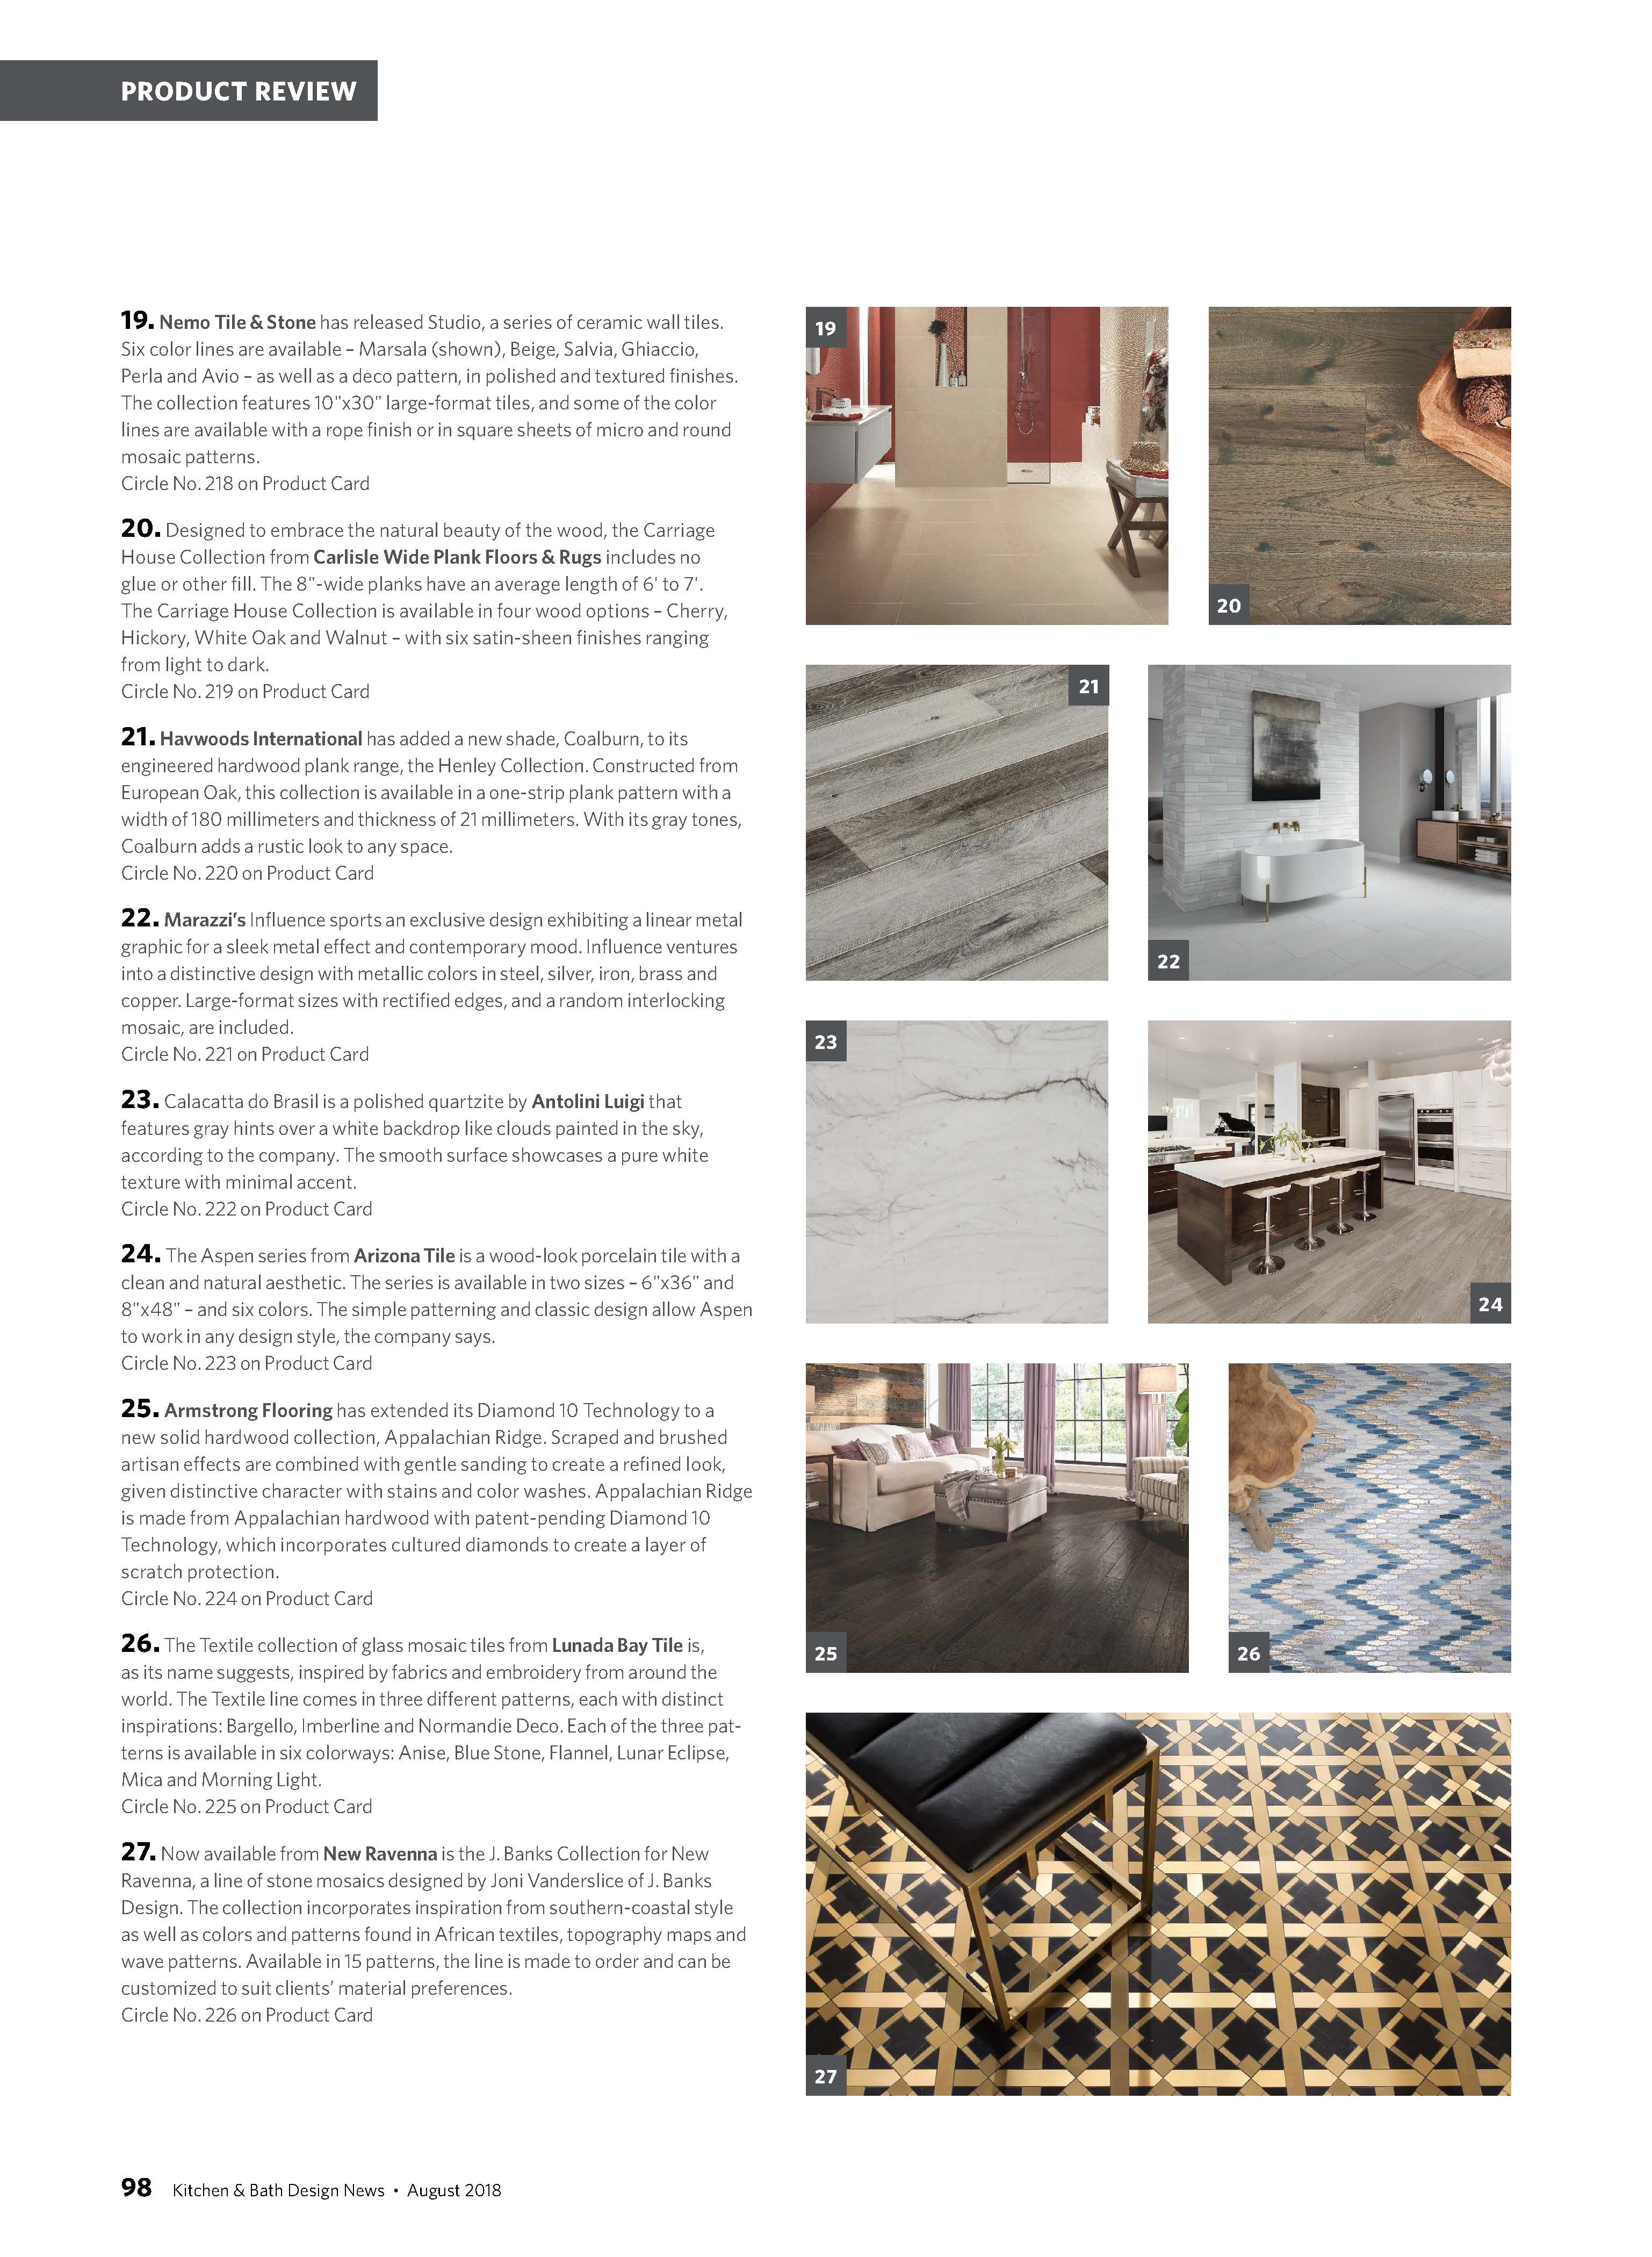 Kitchen & Bath Design News includes Kubuni from J. Banks Design in glorious flooring product review